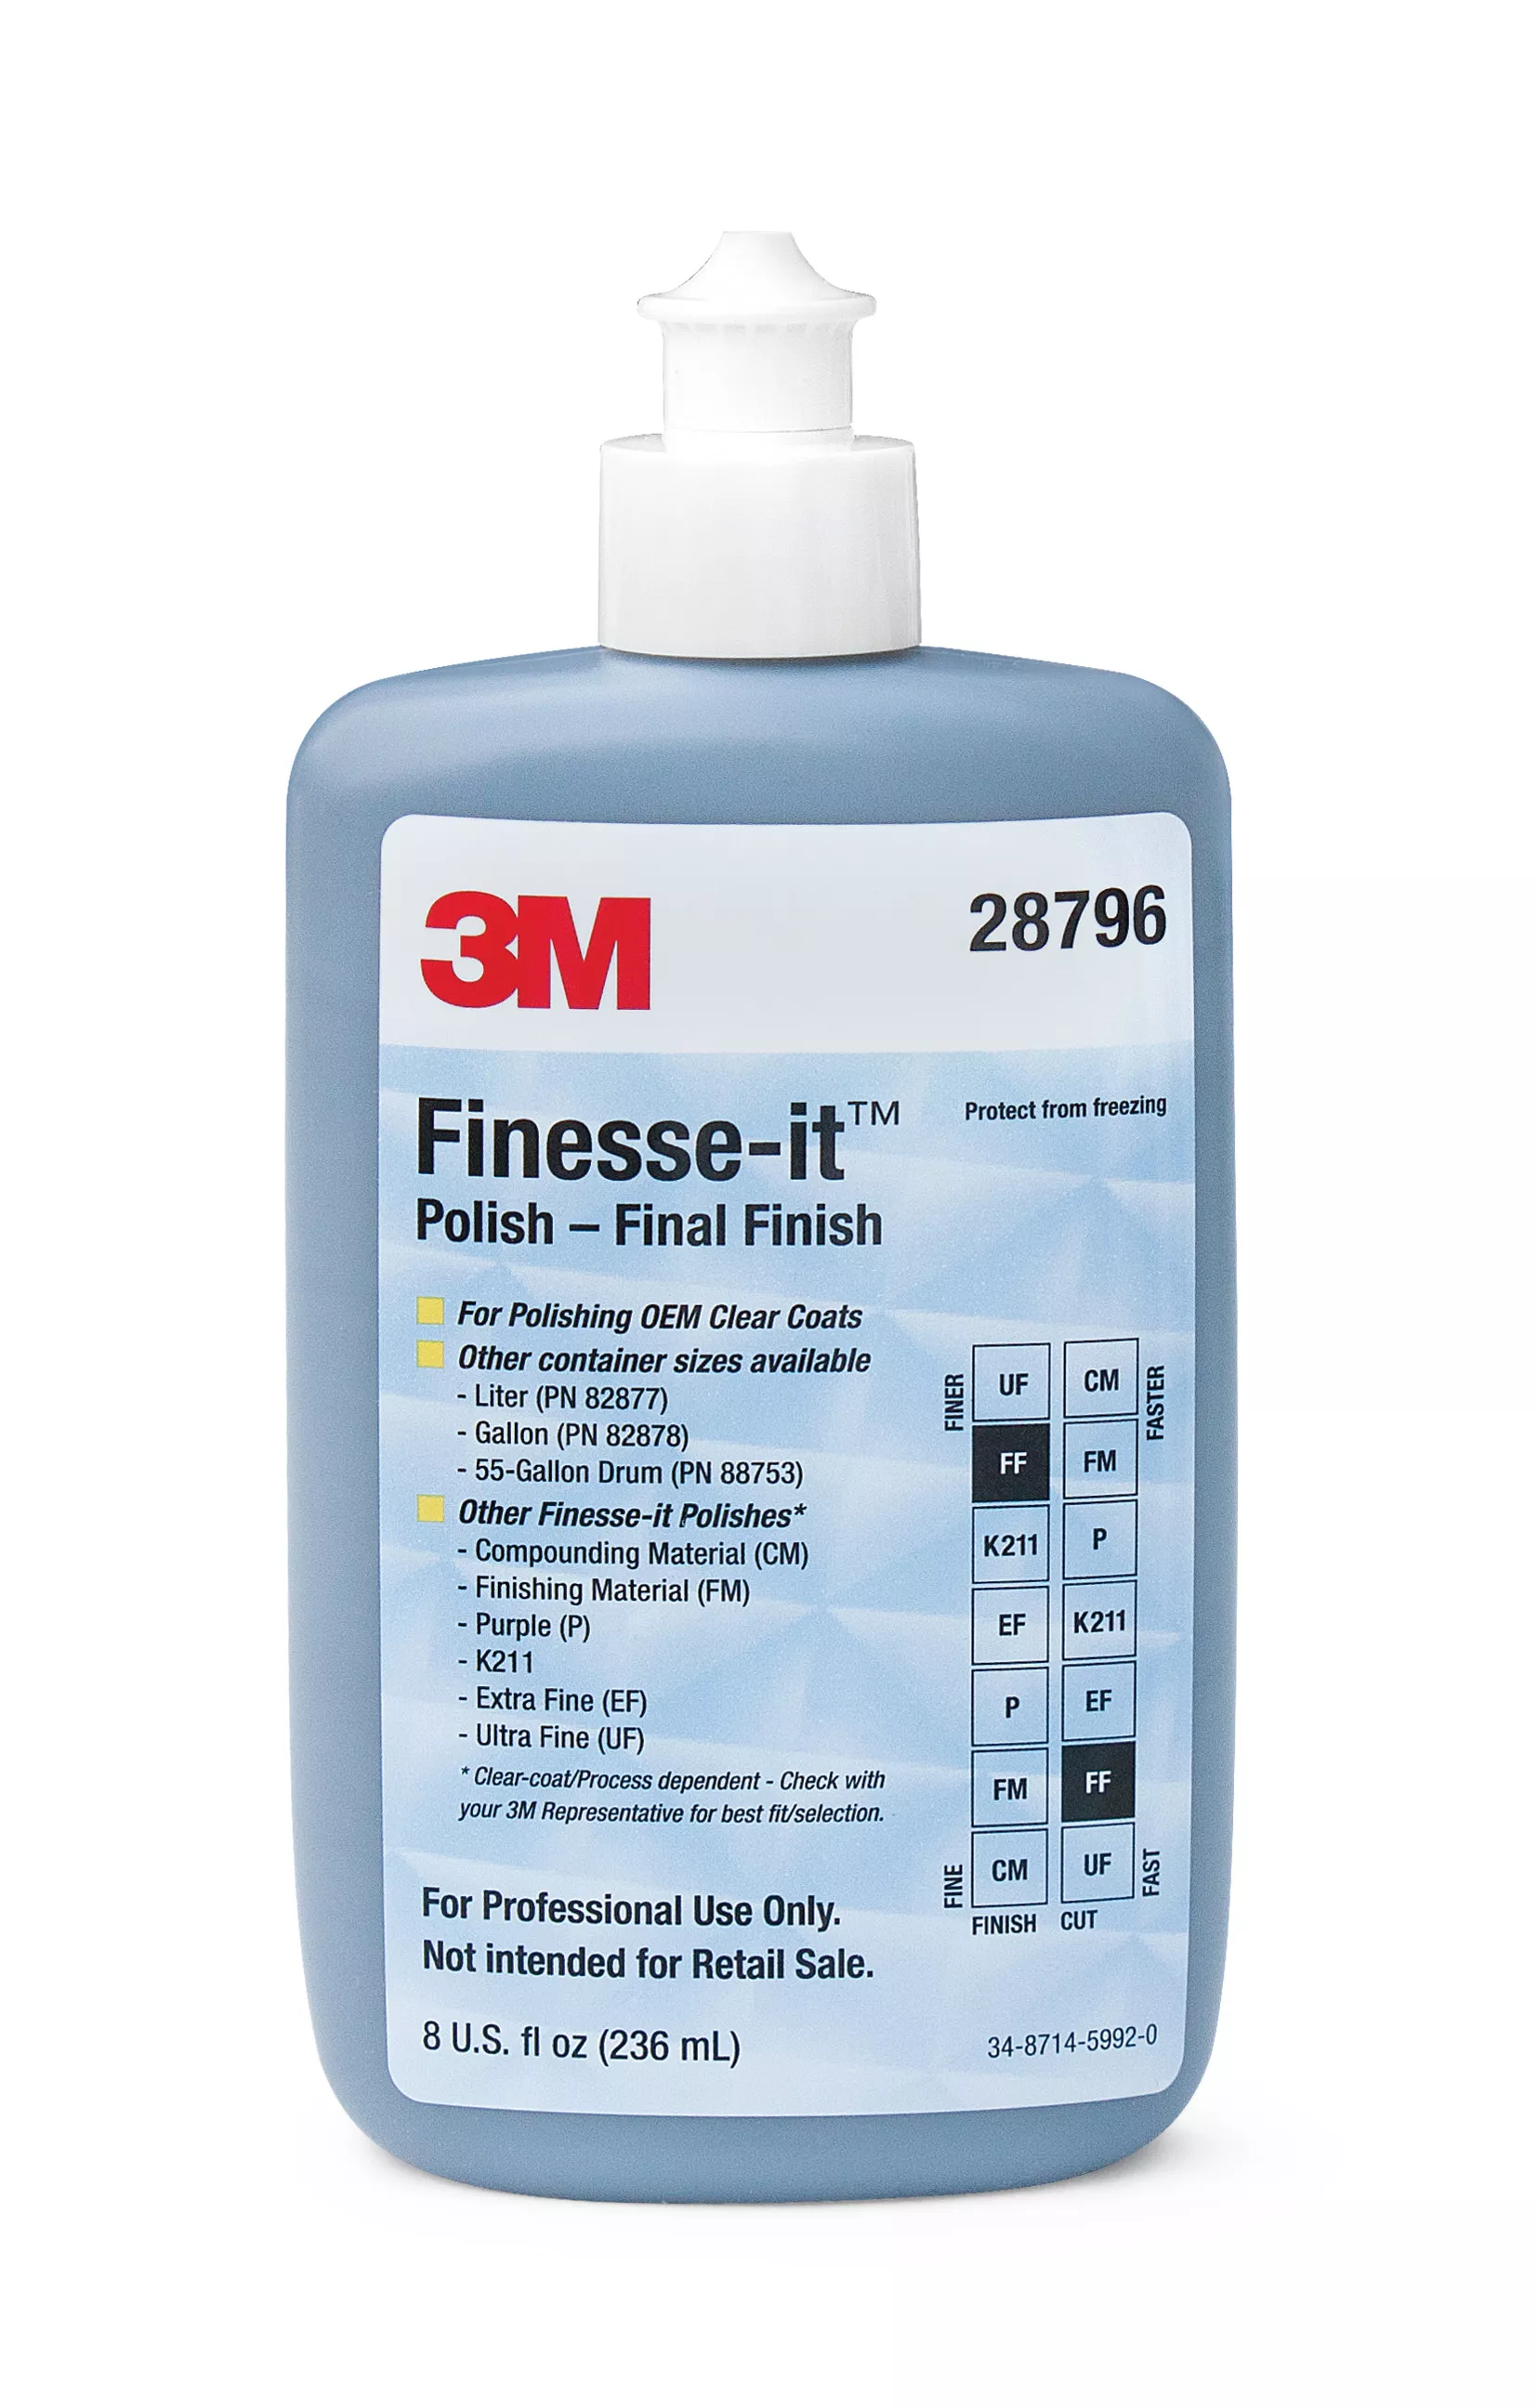 3M™ Finesse-it™ Polish Standard Series, 28796, Final Finish (105), Gray,
Easy Clean Up, 8 oz, 4 ea/Case